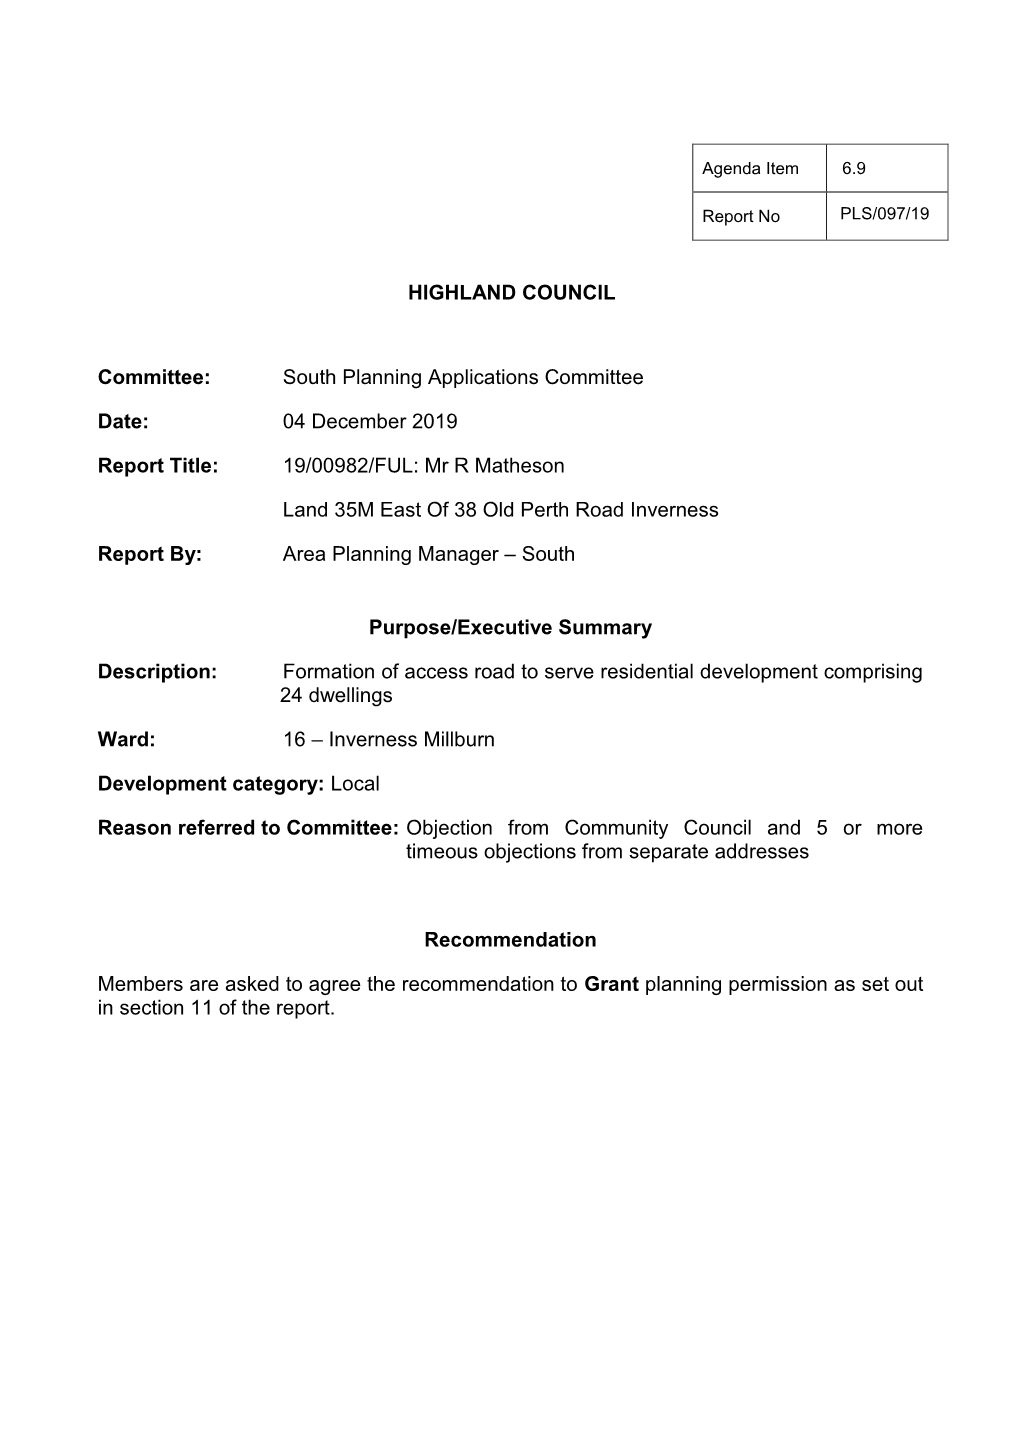 Applicant Has Sought Planning Permission in Principal for a Total of 24 Residential Units Under a Separate Application (19/00982/FUL)